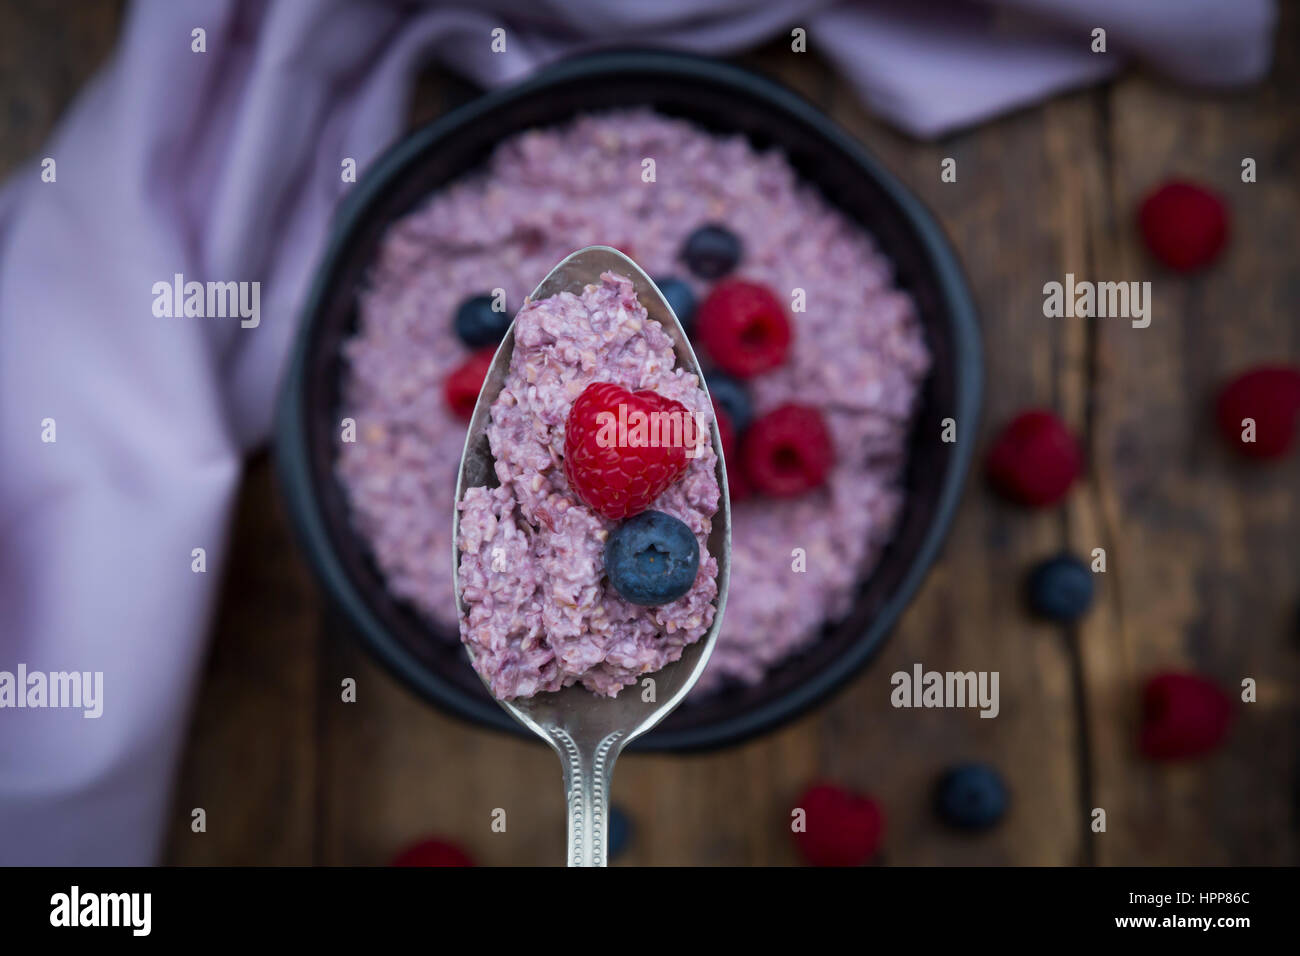 Spoon of overnight oats with blueberries and raspberries, close-up Stock Photo